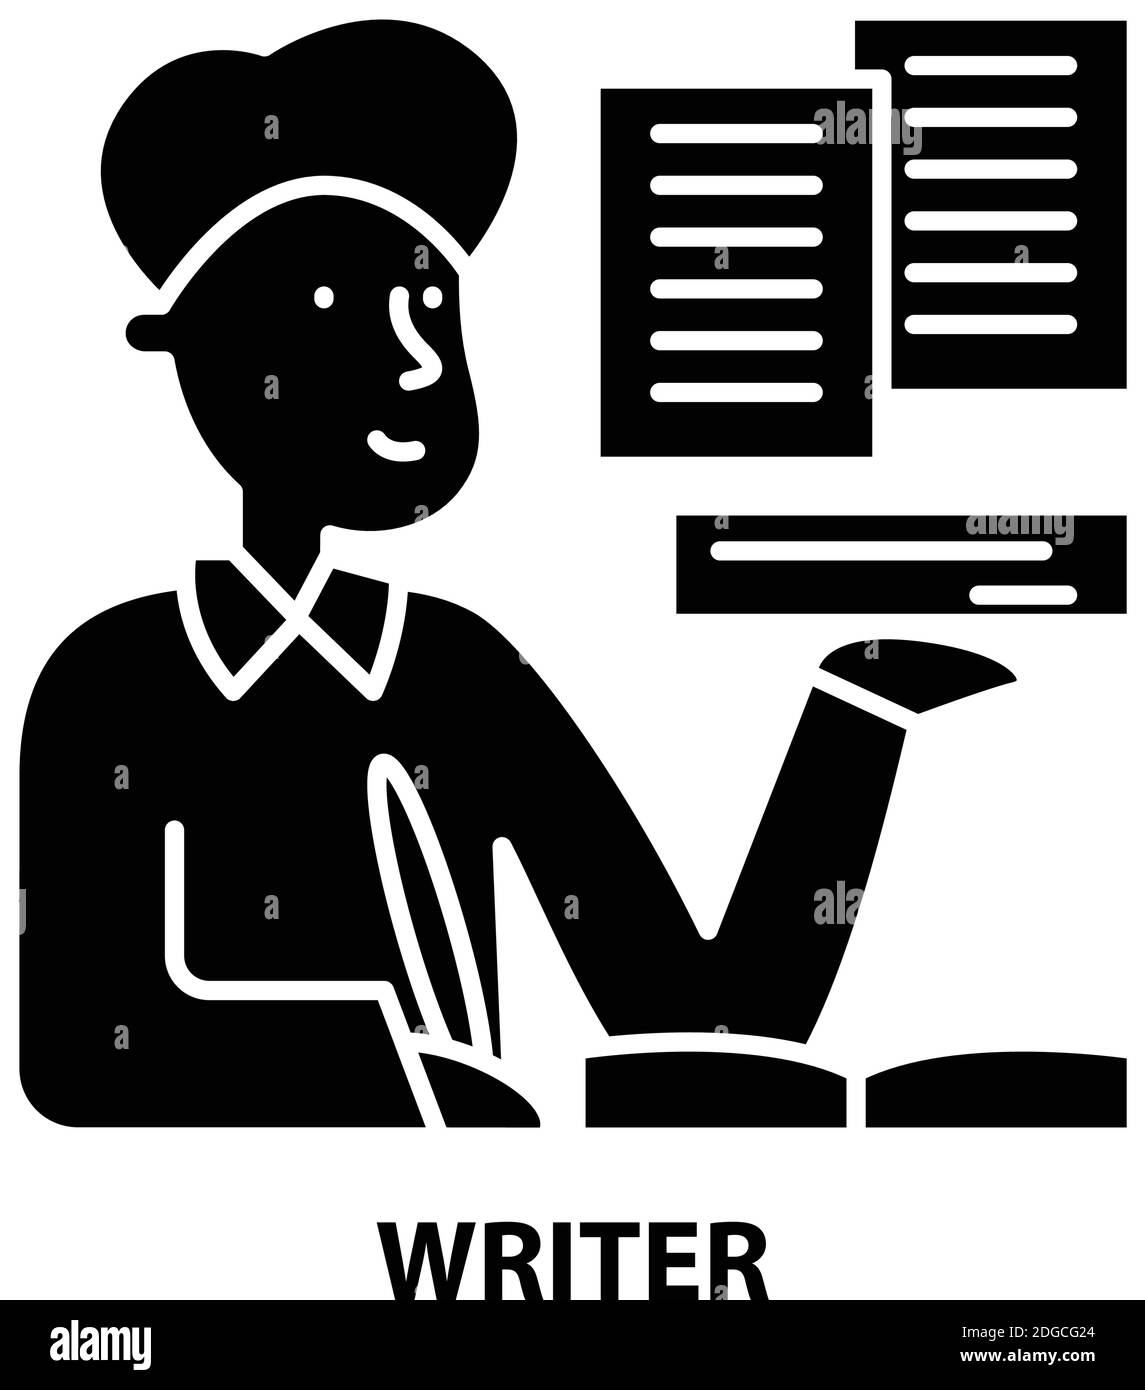 writer icon, black vector sign with editable strokes, concept illustration Stock Vector